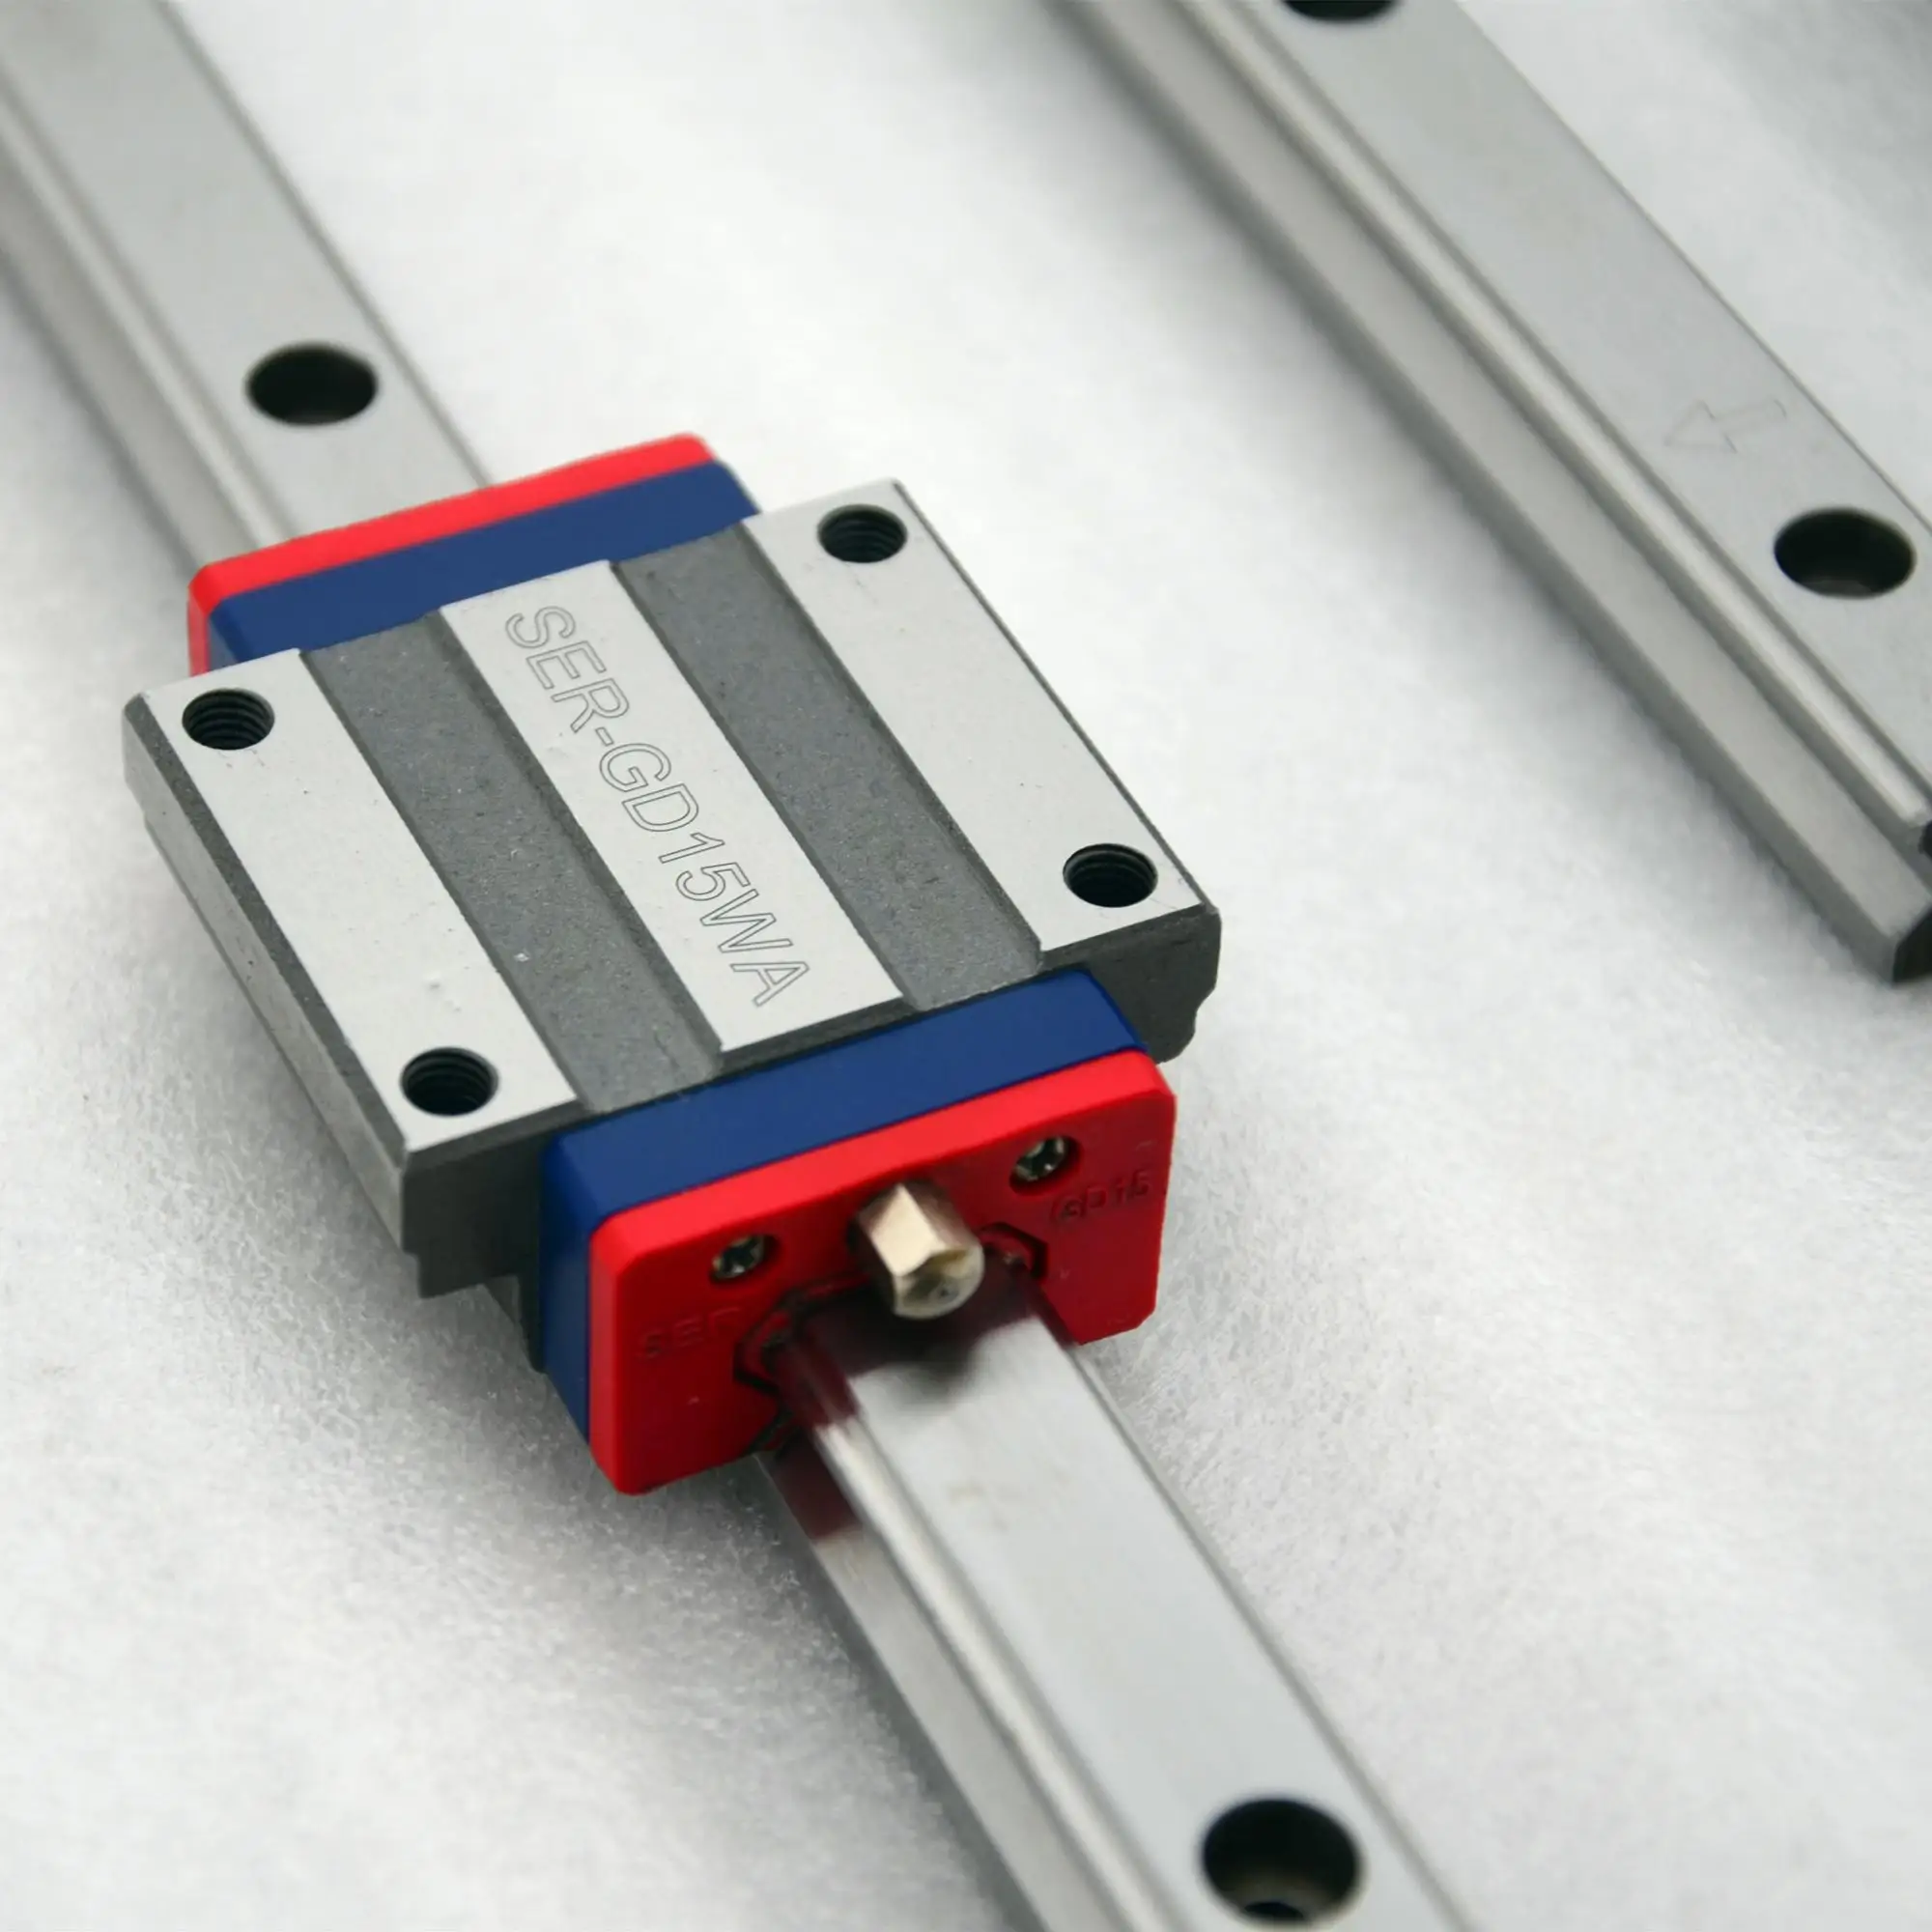 Hgr15 Hgr20 Hgr25 Hgr30 Hgr35 Hgr45 Hiwin Linear Guide Rail And Block  Slider Carriage - Buy Hiwin Linear Guide Rail,Guide Rail And Block Slider  Carriage,Hgr Linear Guide Product on Alibaba.com